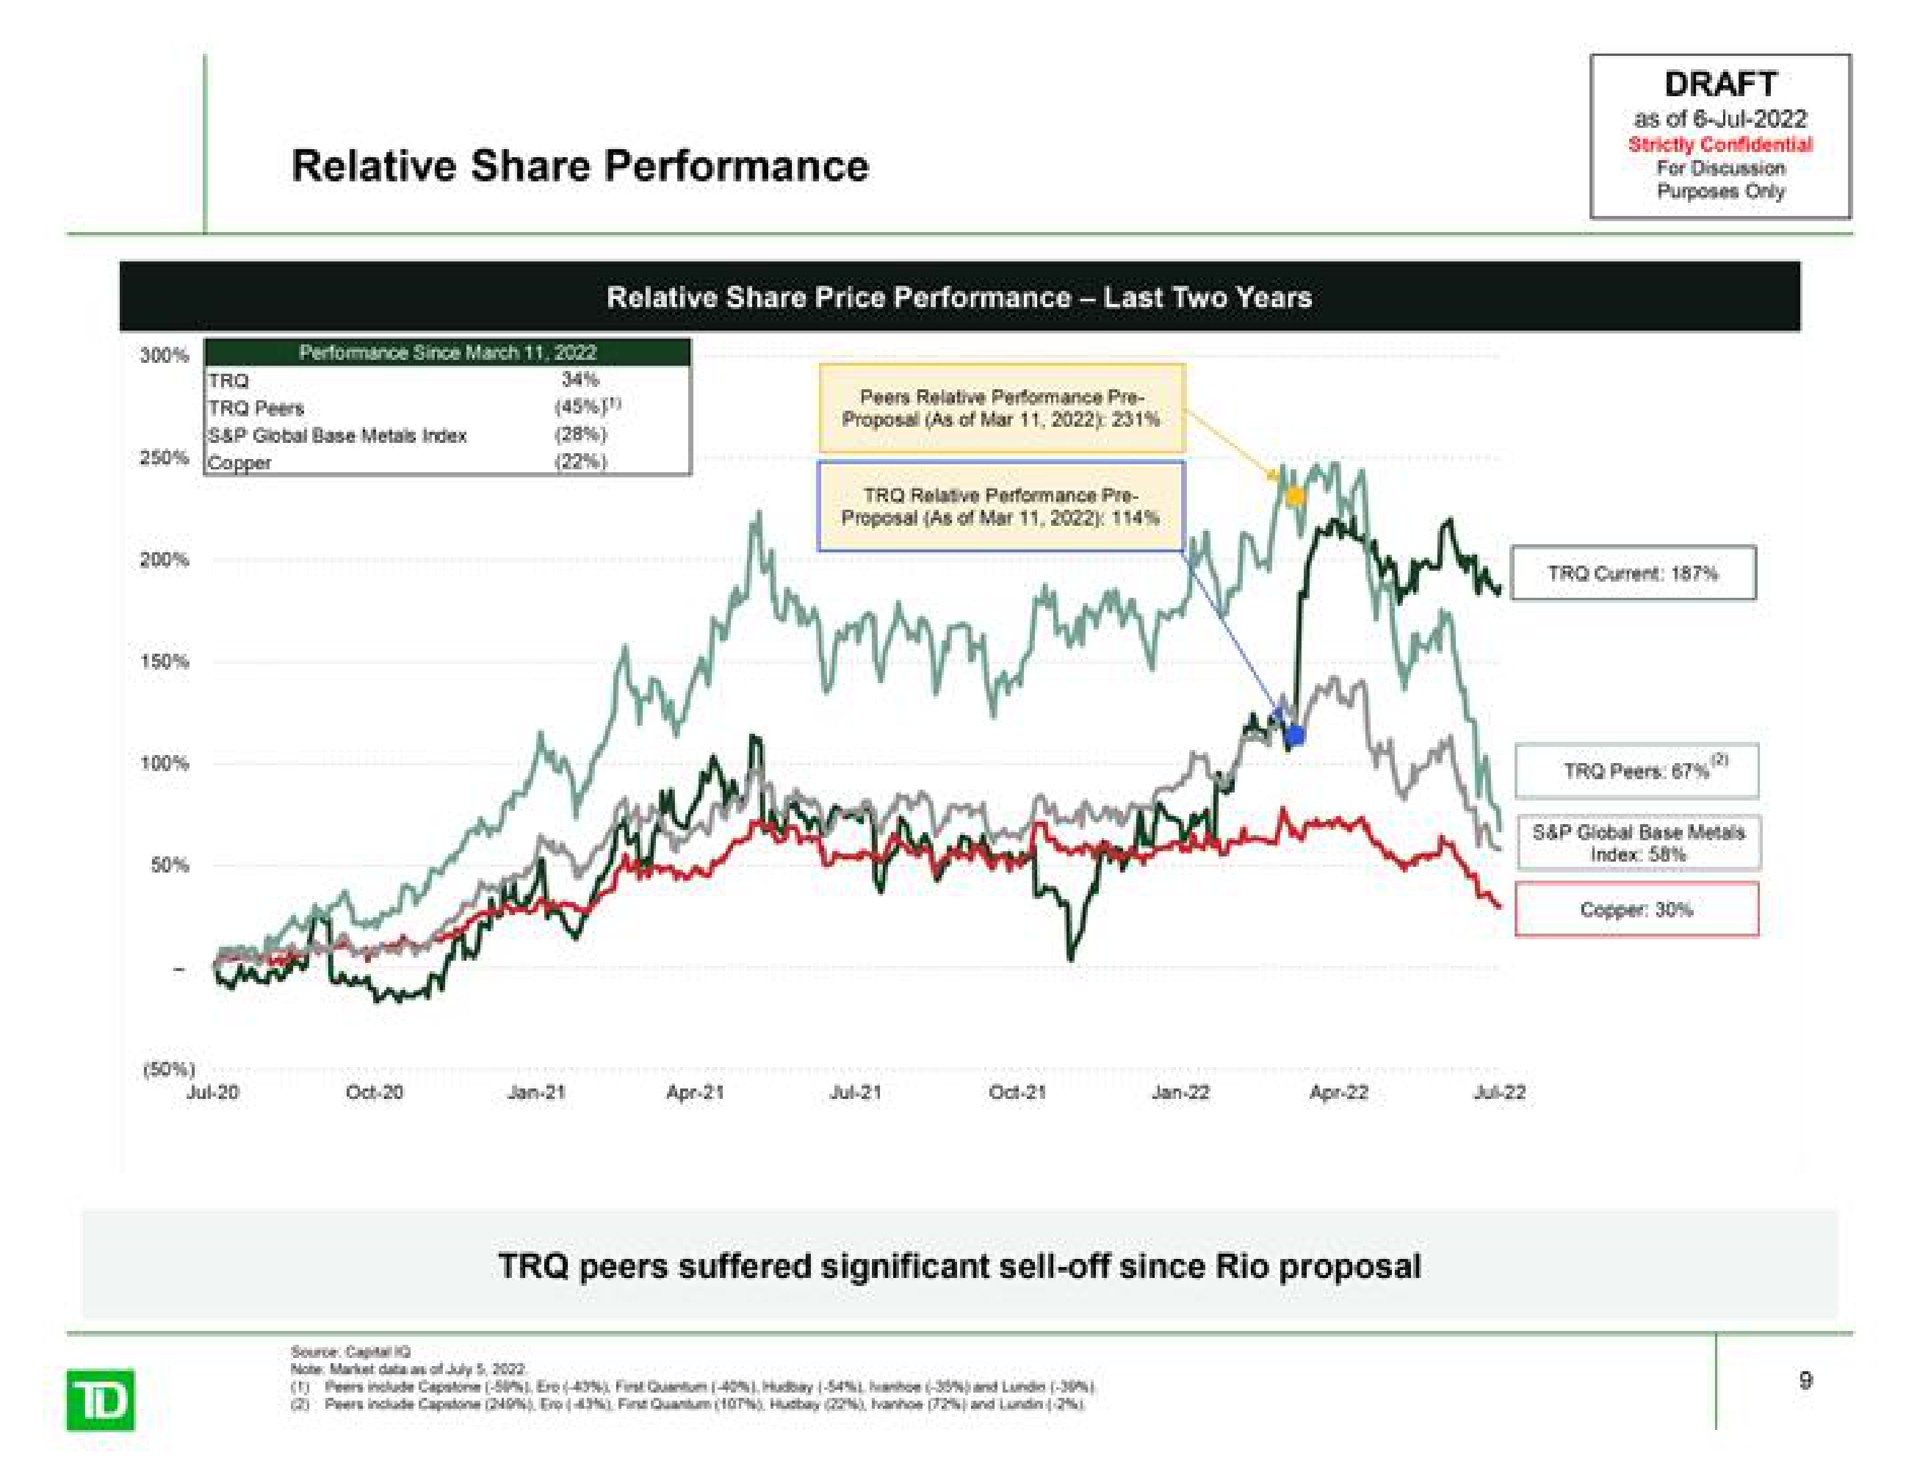 relative share performance draft as of for discussion peers suffered significant sell off since rio proposal | TD Securities